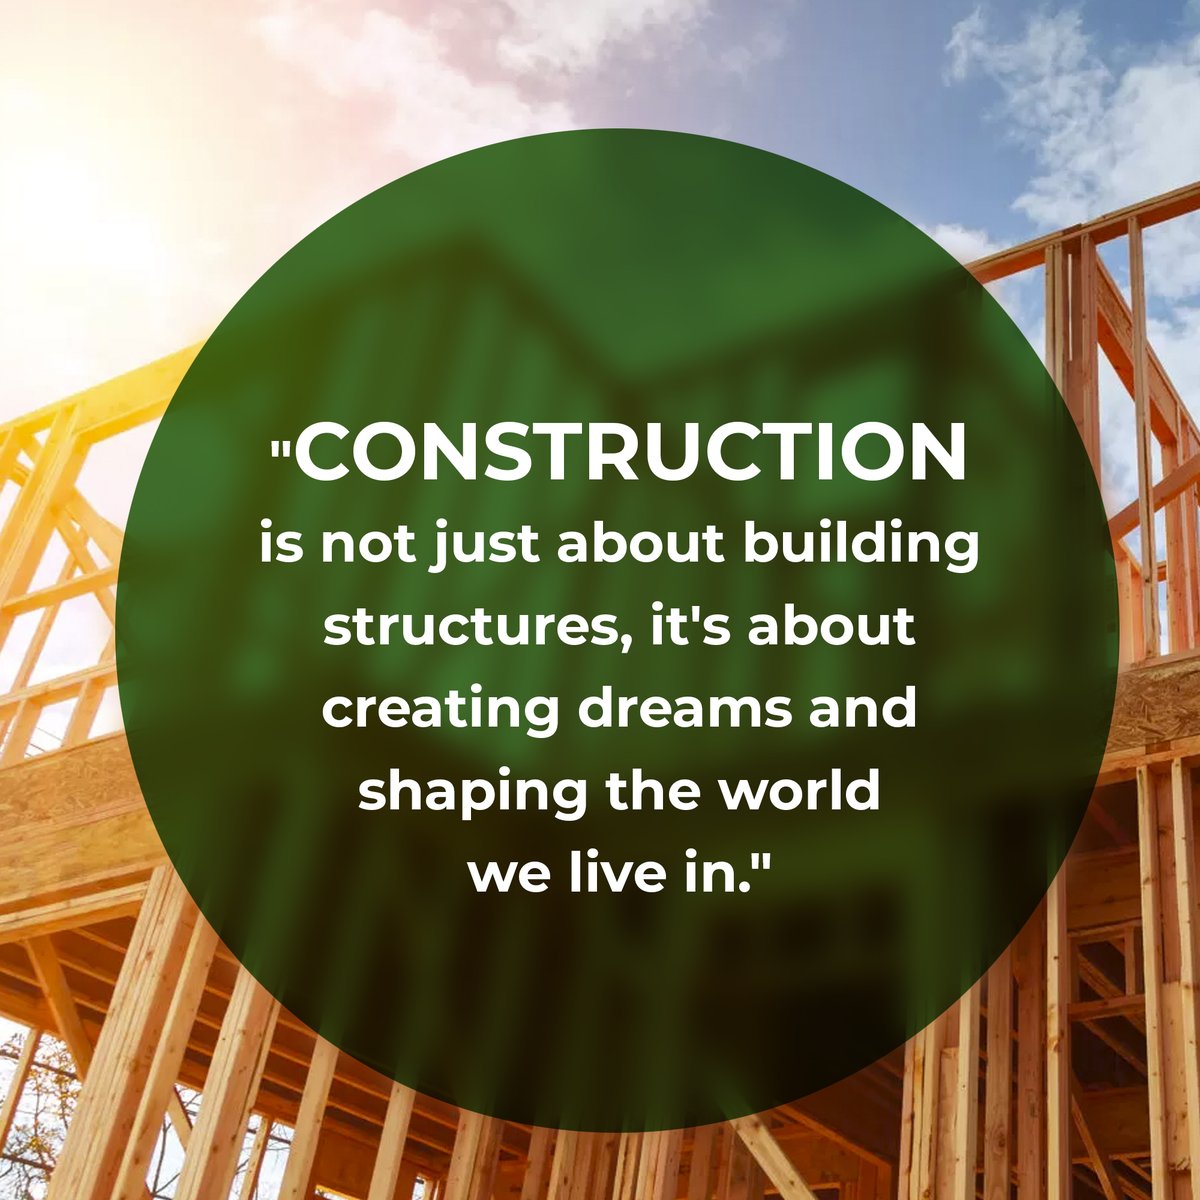 🔨🌍 Construction is more than bricks and beams. It's about realizing dreams, shaping our world, and inspiring generations. Let's build a future of endless possibilities! 💪✨ #ConstructionGoals #ShapingTheWorld #BuildingOurFuture #BuildingCommunities #BuildWithPurpose